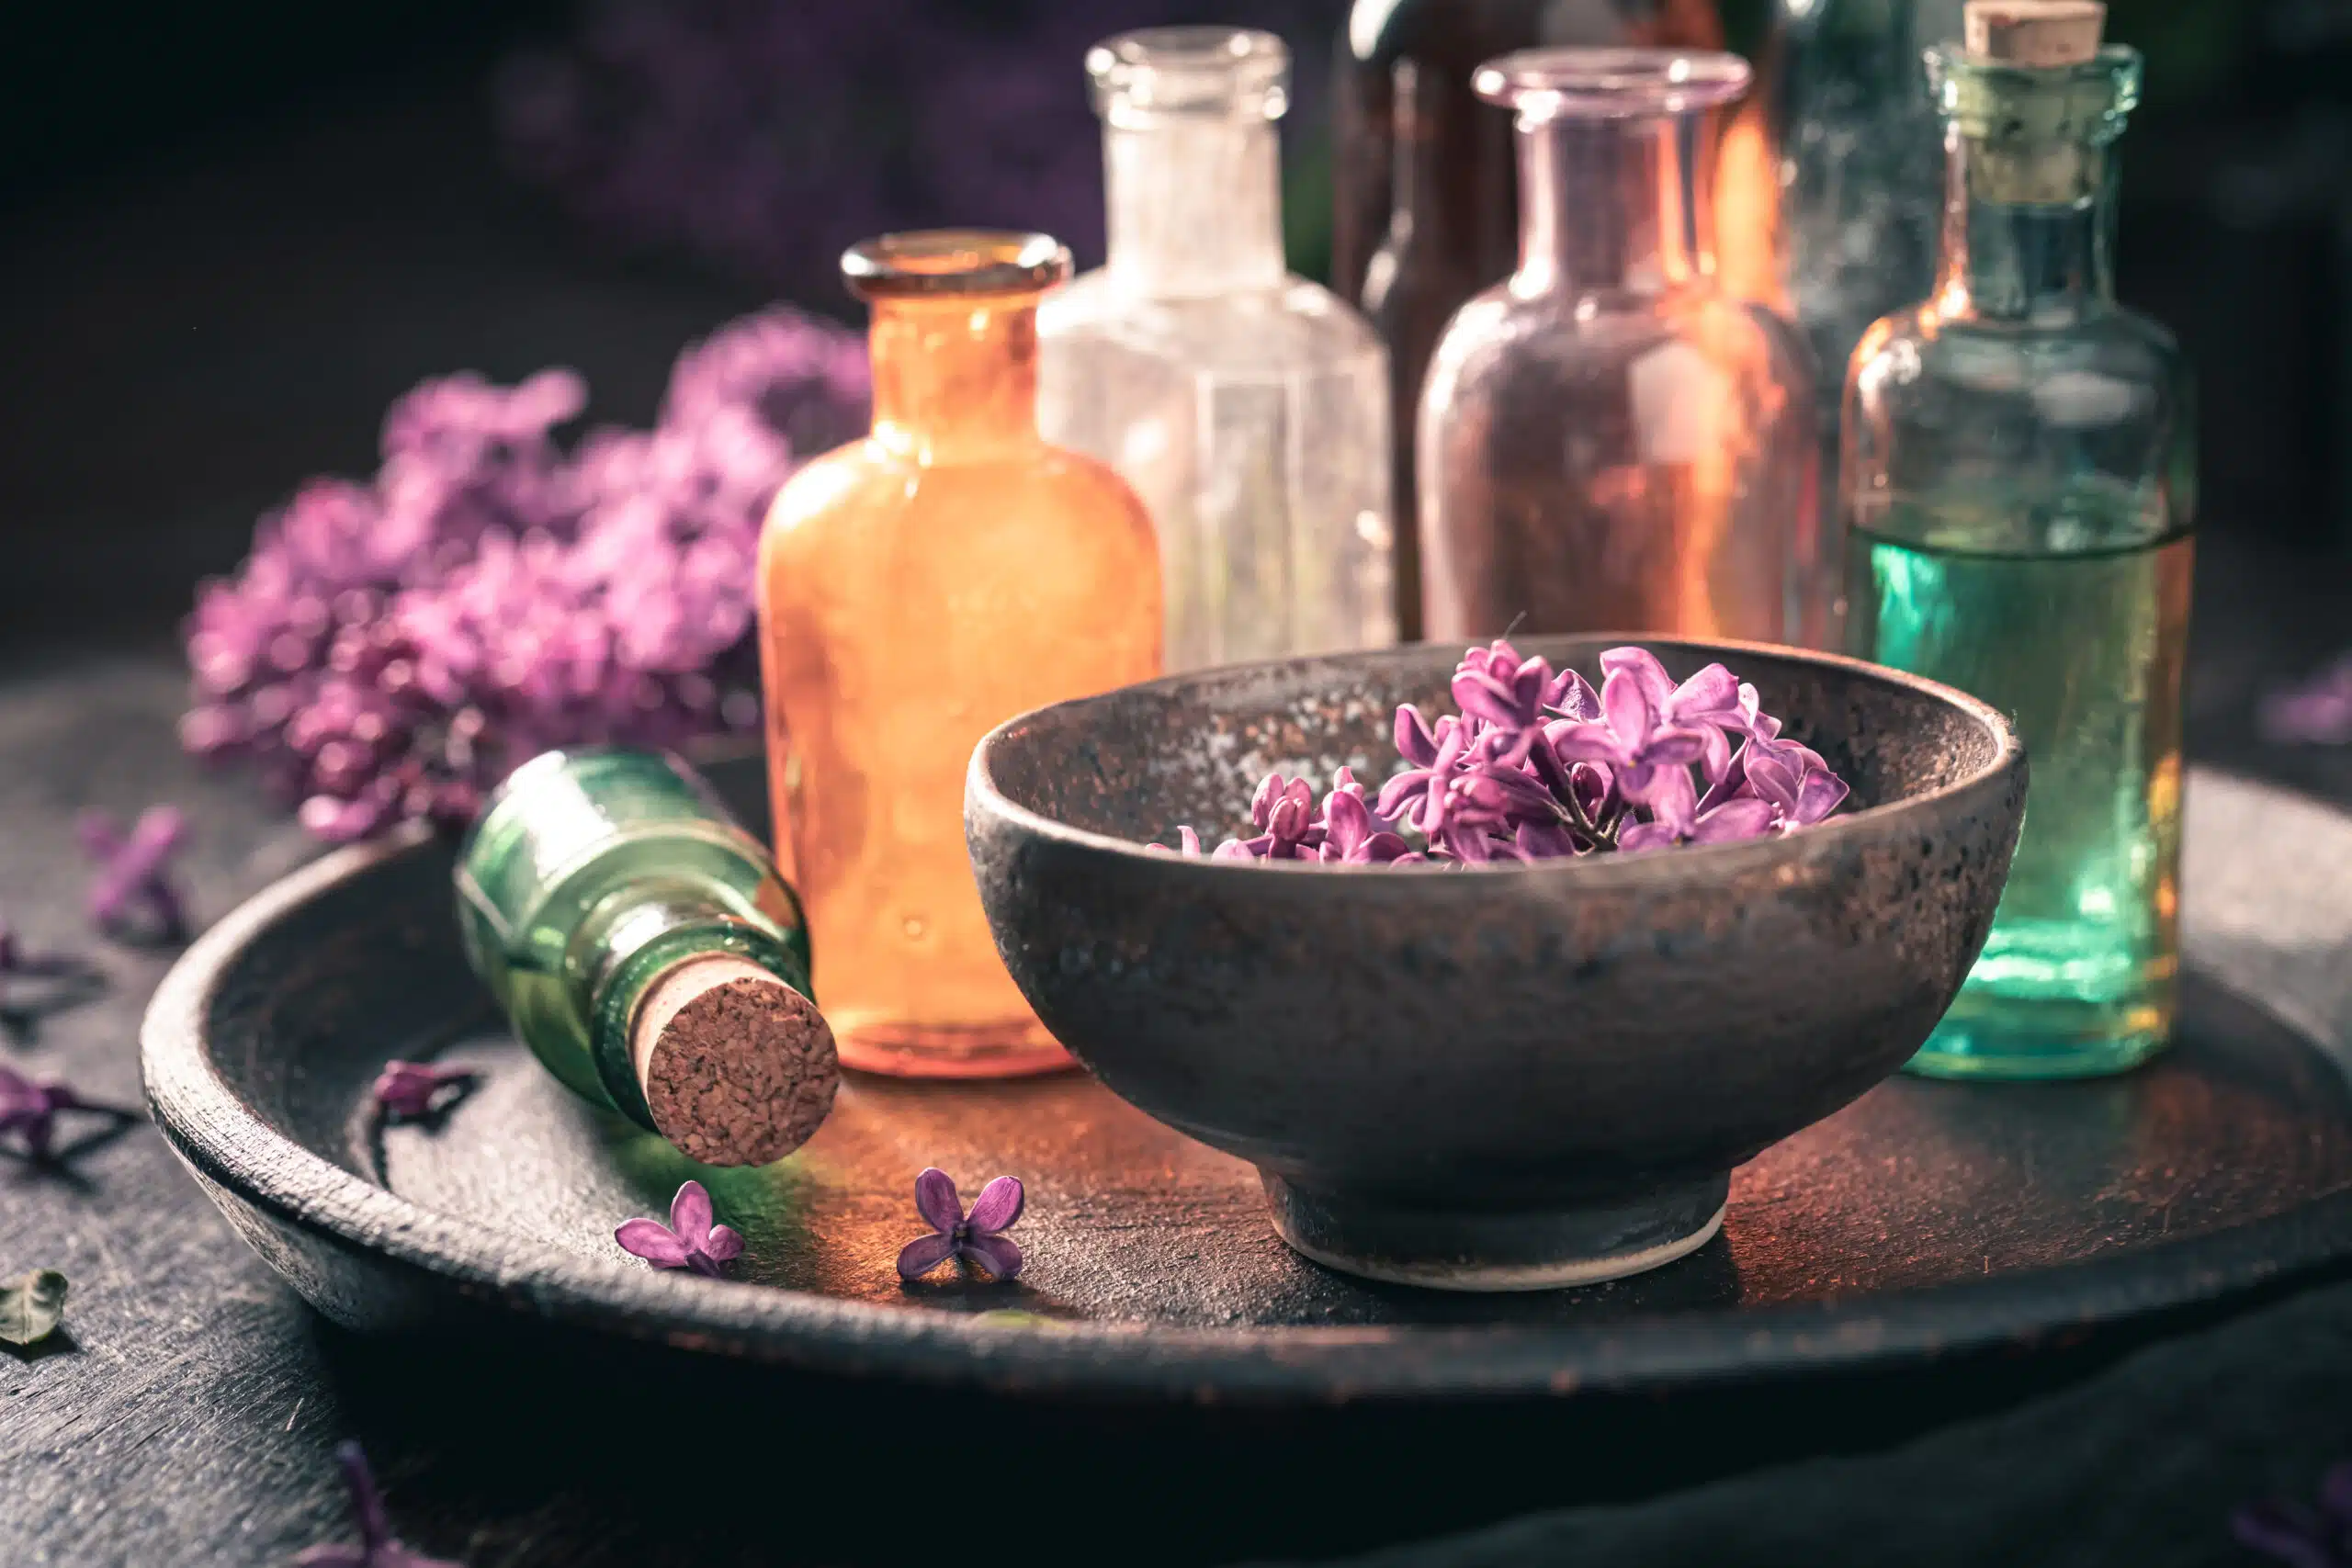 Special treatments with aromatic oils. Lilac aromatic oils. Homemade Products of flowers.